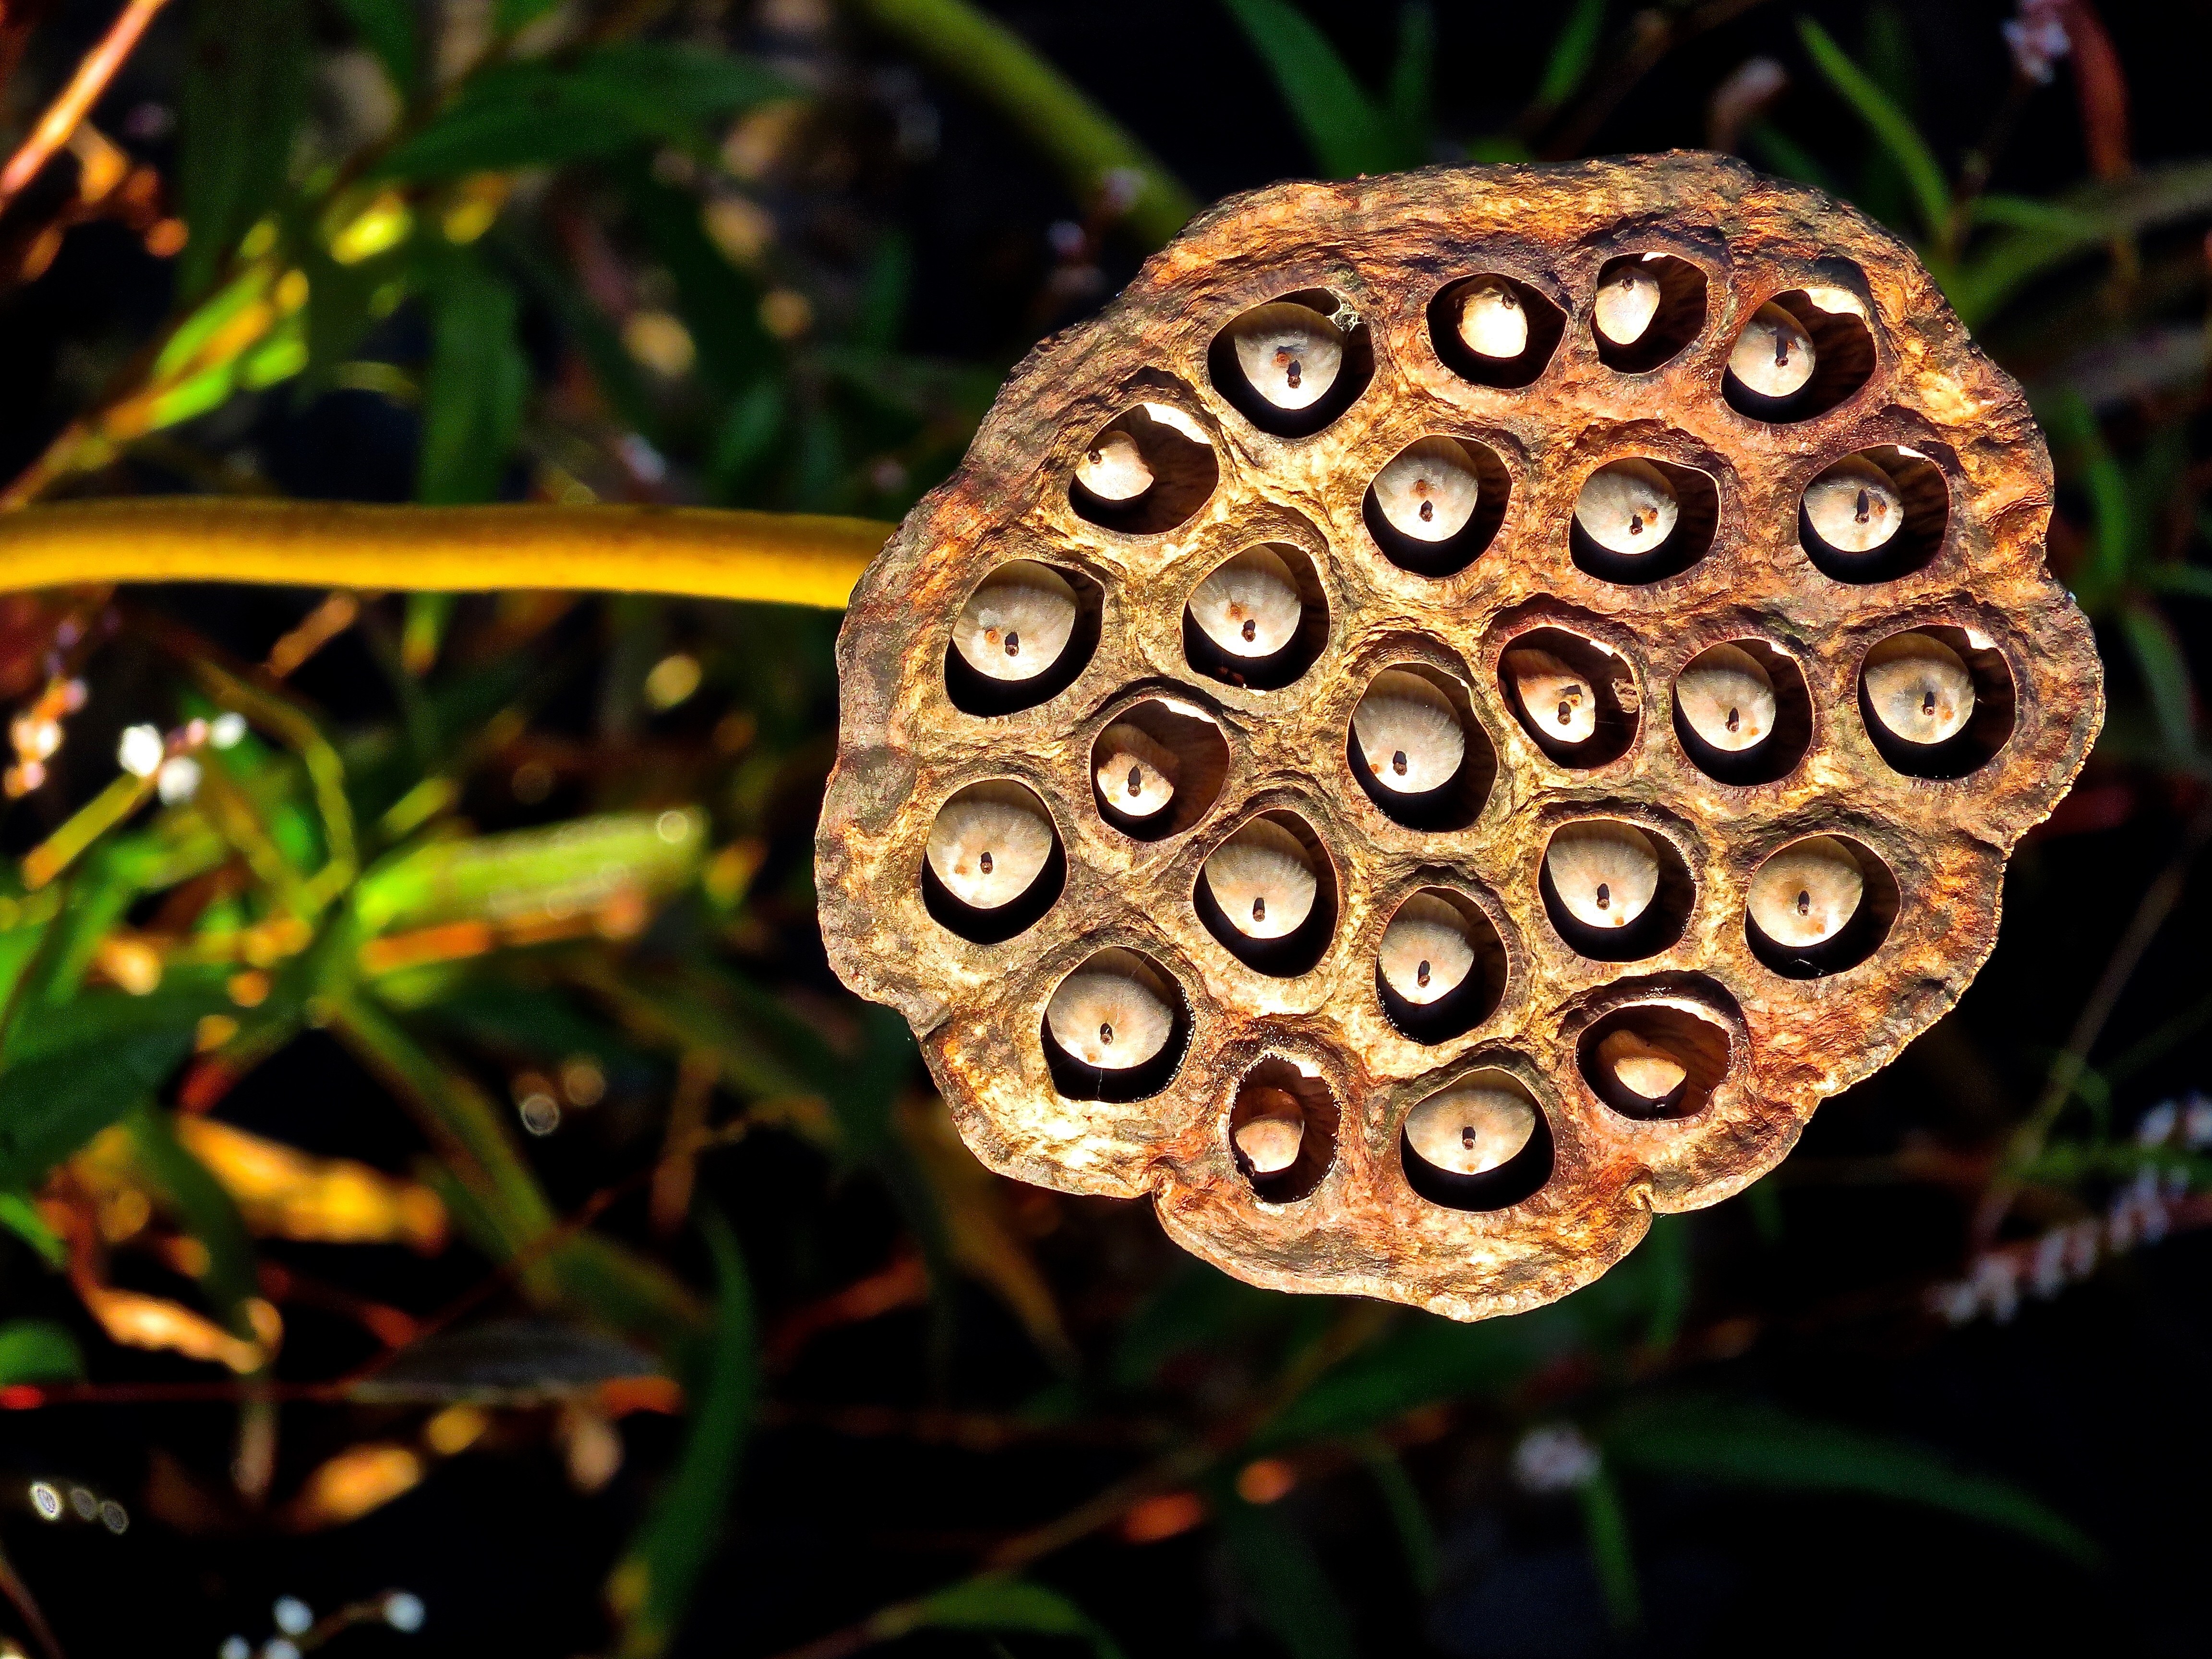 Lotus flower and seeds. Photo: Getty Images